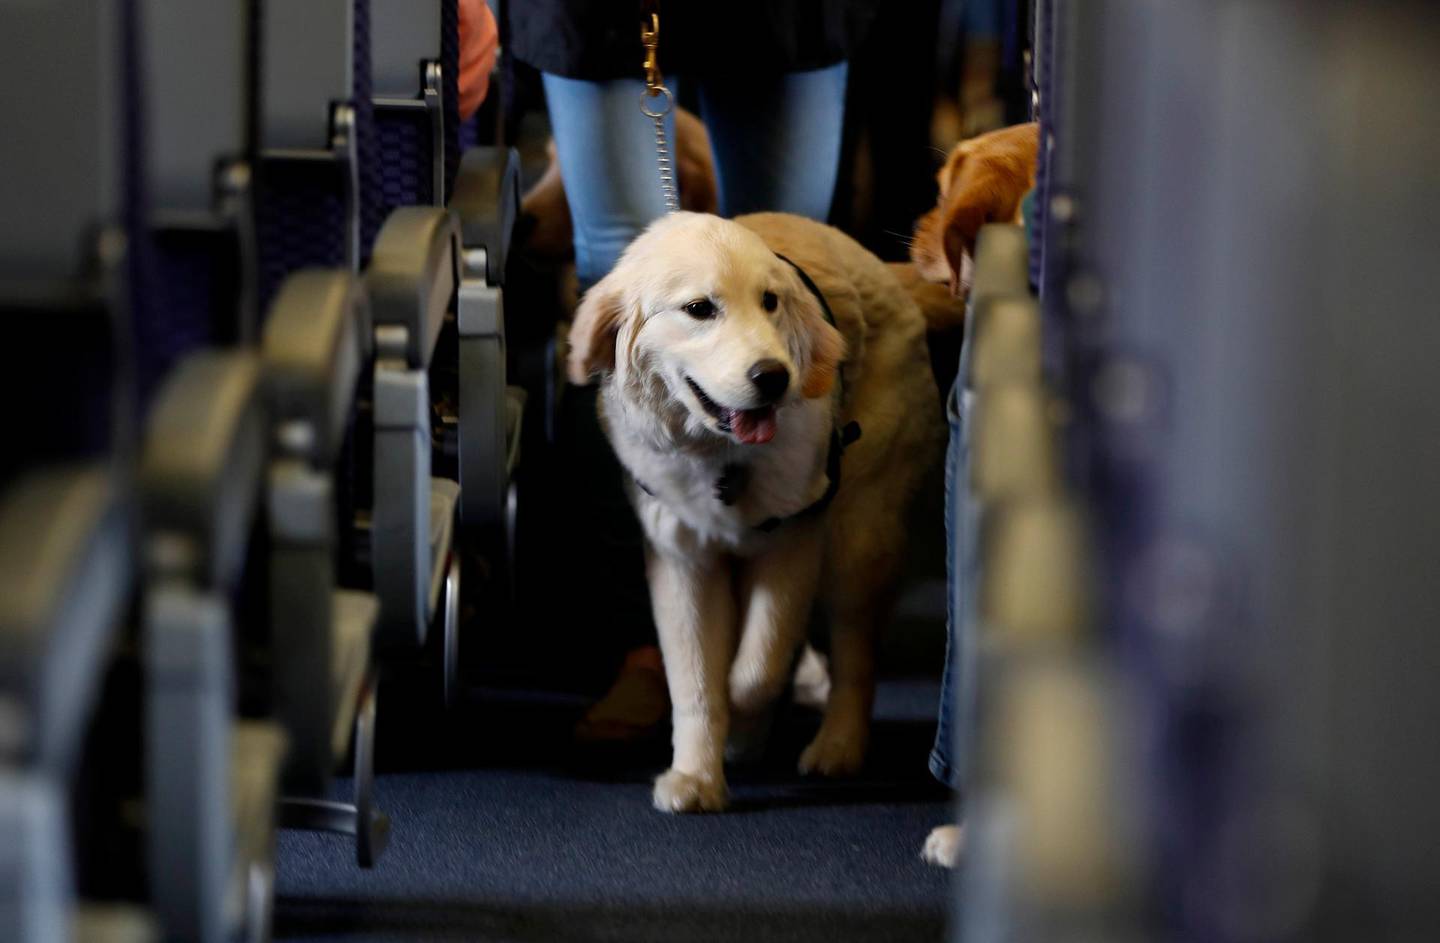 FILE - In this April 1, 2017 file photo, a service dog strolls through the isle inside a United Airlines plane at Newark Liberty International Airport while taking part in a training exercise, in Newark, N.J. Delta Air Lines says for safety reasons it will require owners of service and support animals to provide more information before their animal can fly in the passenger cabin, including an assurance that it's trained to behave itself.  (AP Photo/Julio Cortez, File)